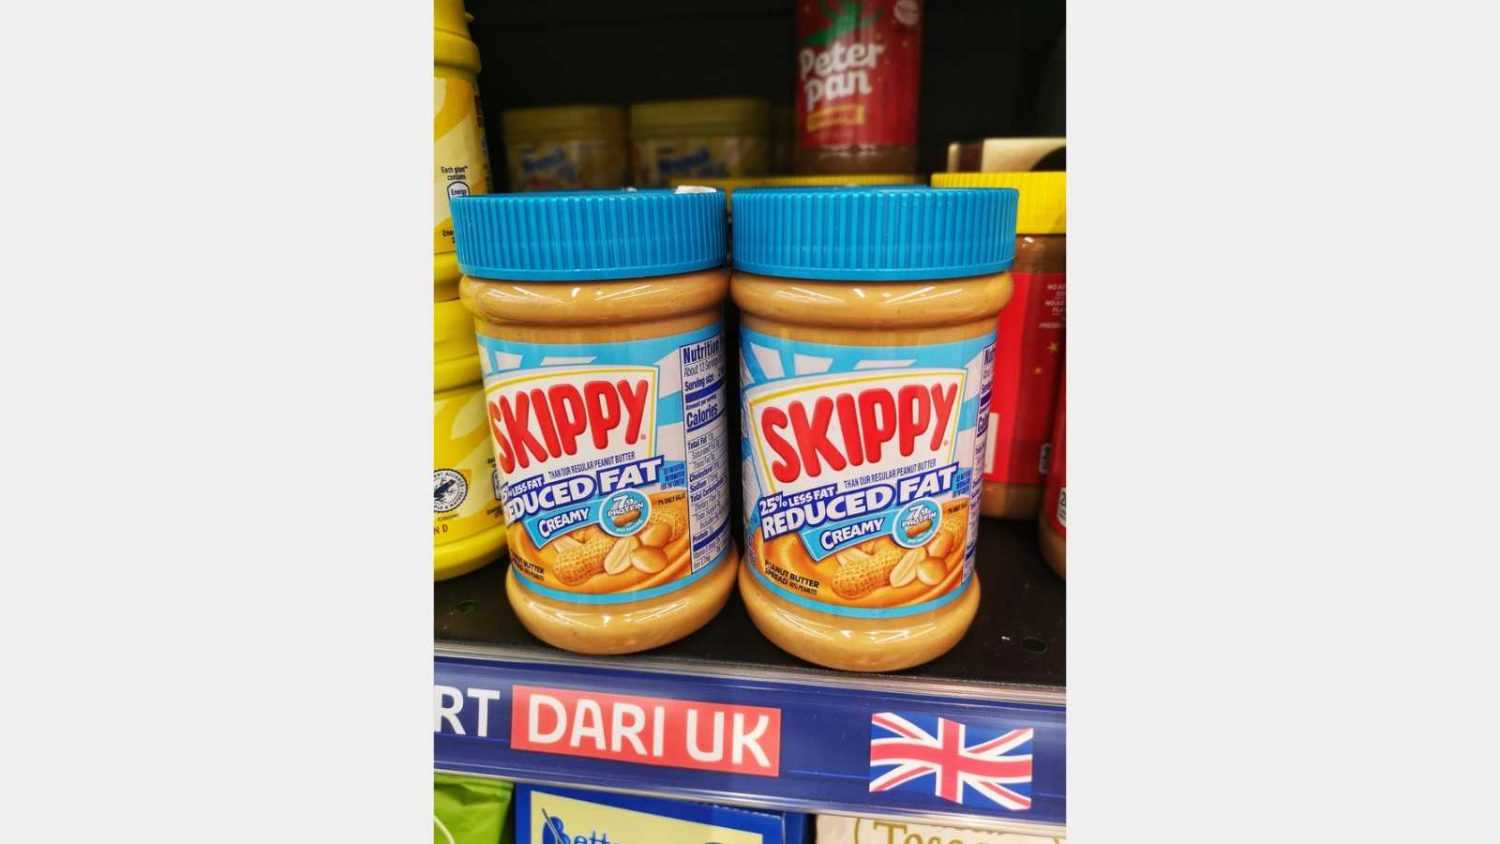 Setia Alam, Malaysia - 16 April 2022 : SKIPPY Peanut Butter Spread jars display for sell on the supermarket shelf with selective focus.